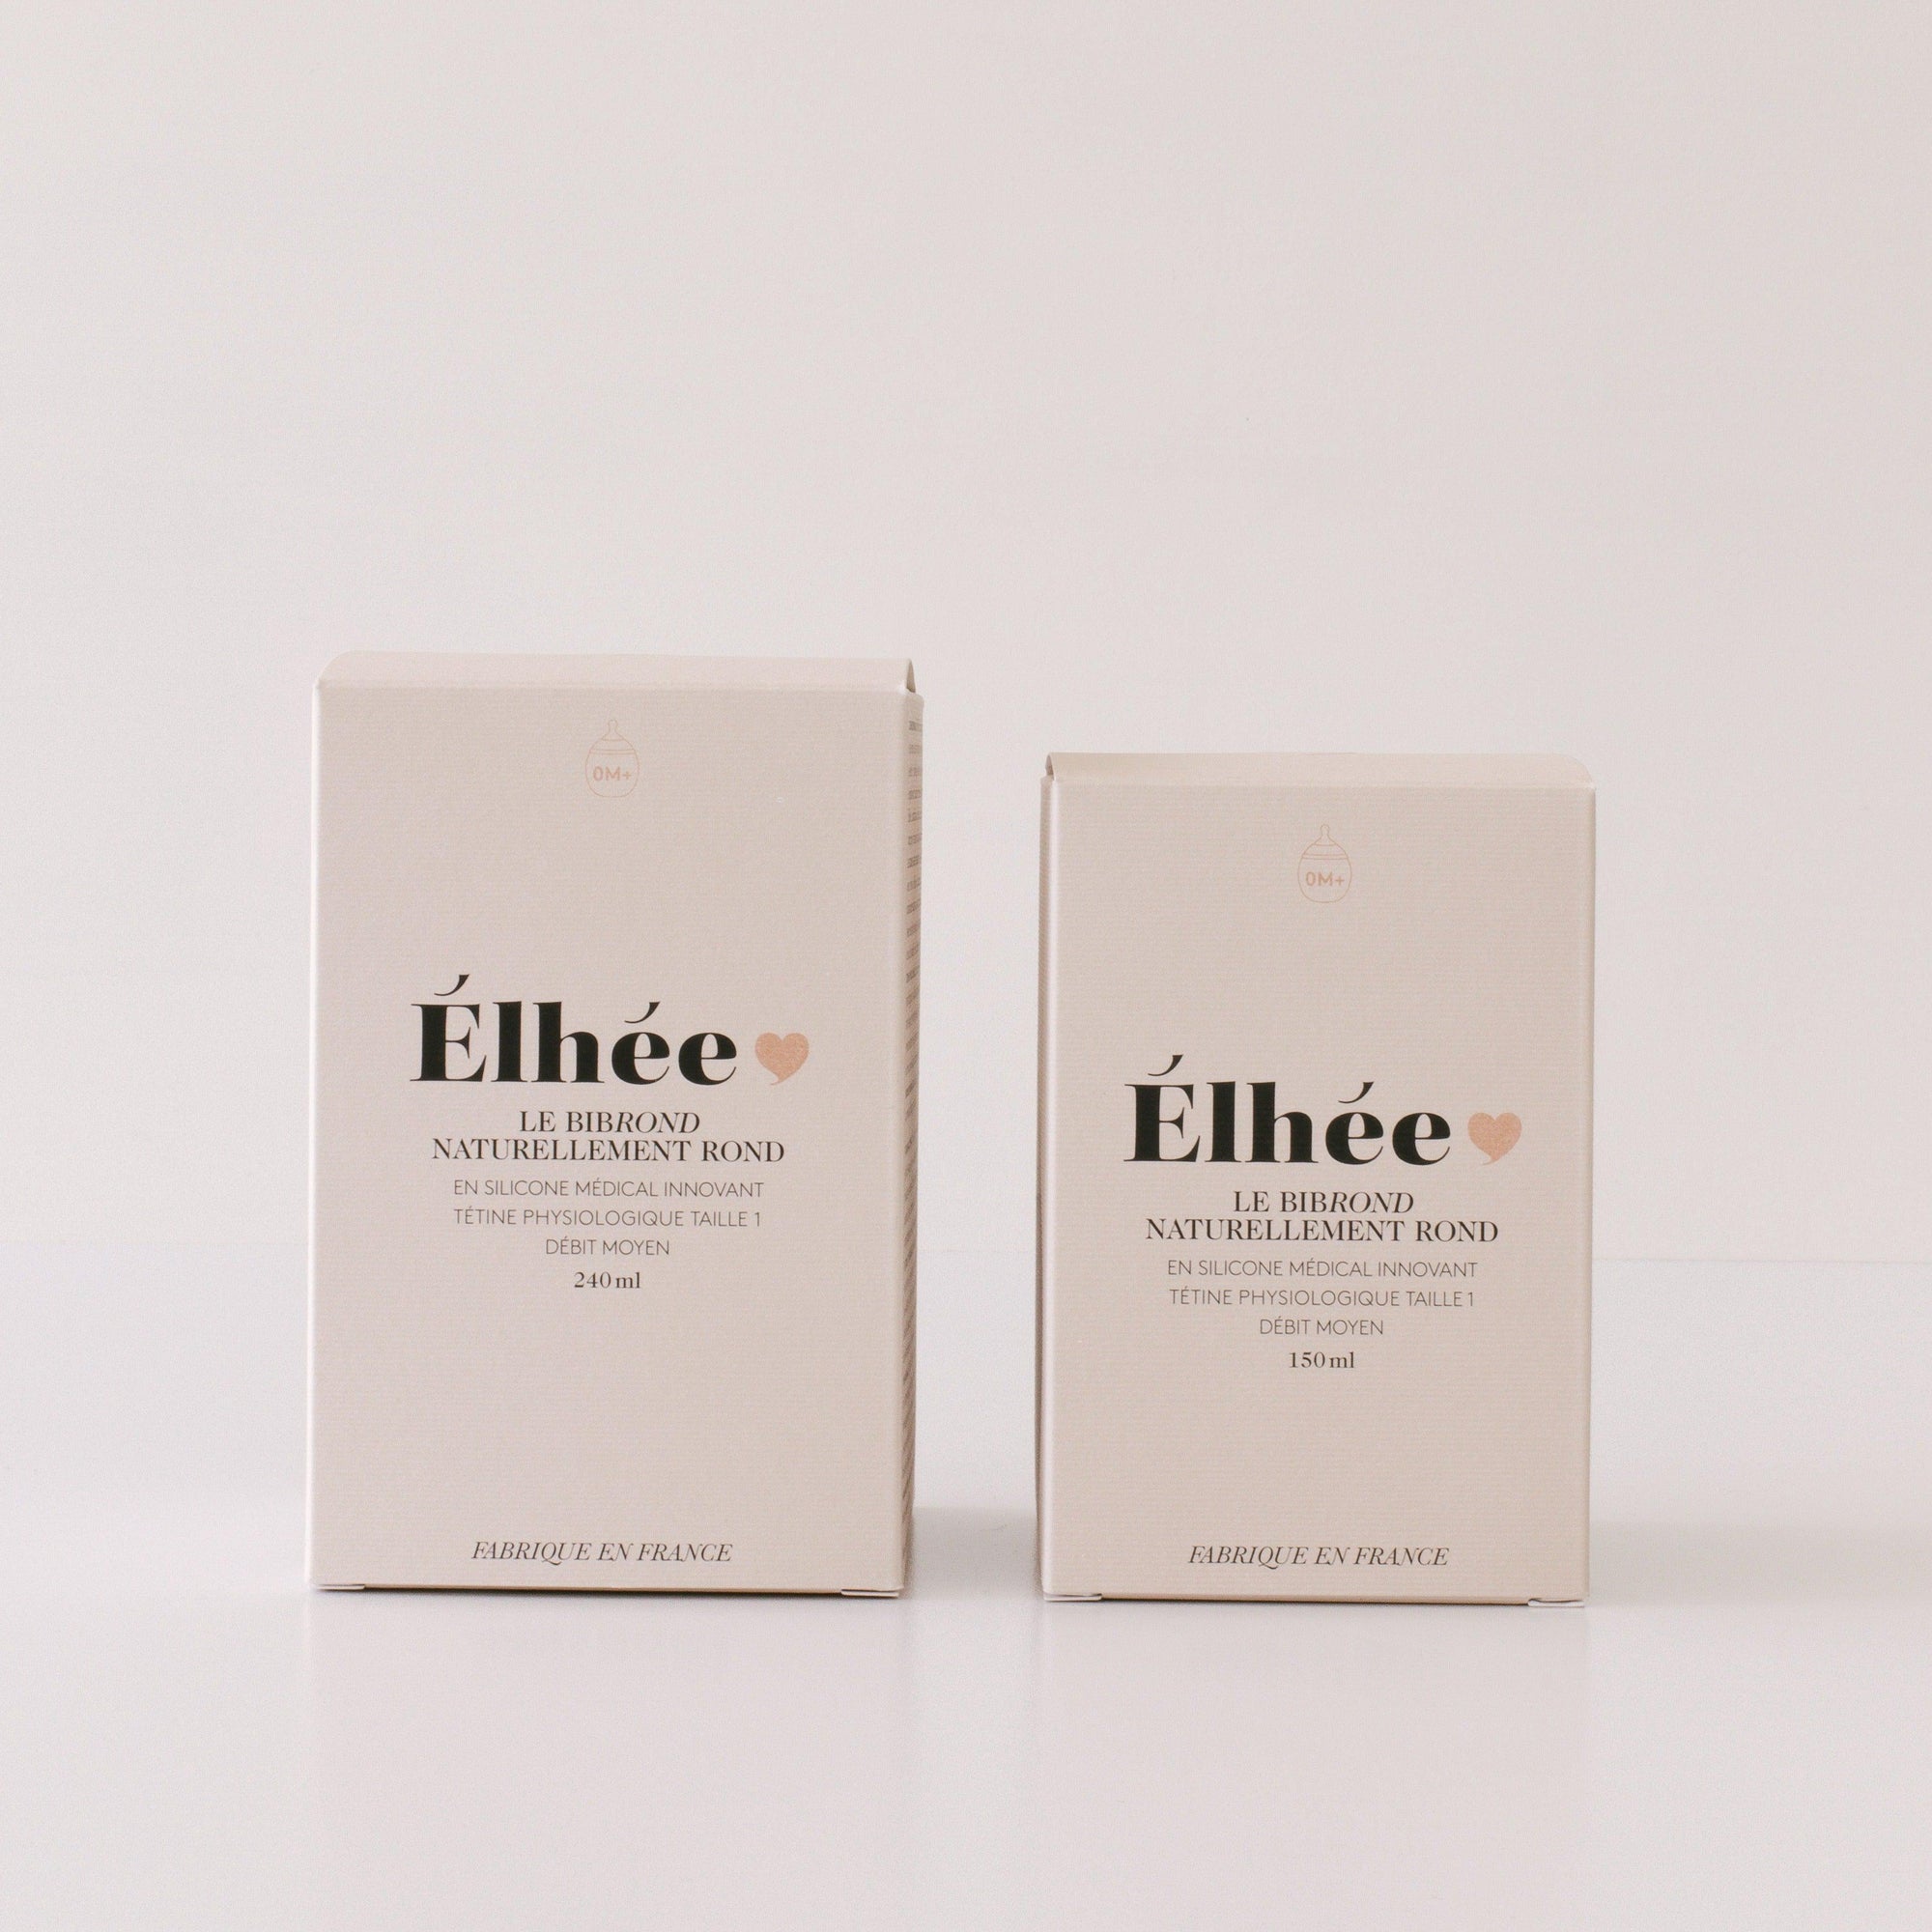 Two bibrond sand baby bottle boxes by Elhée France.